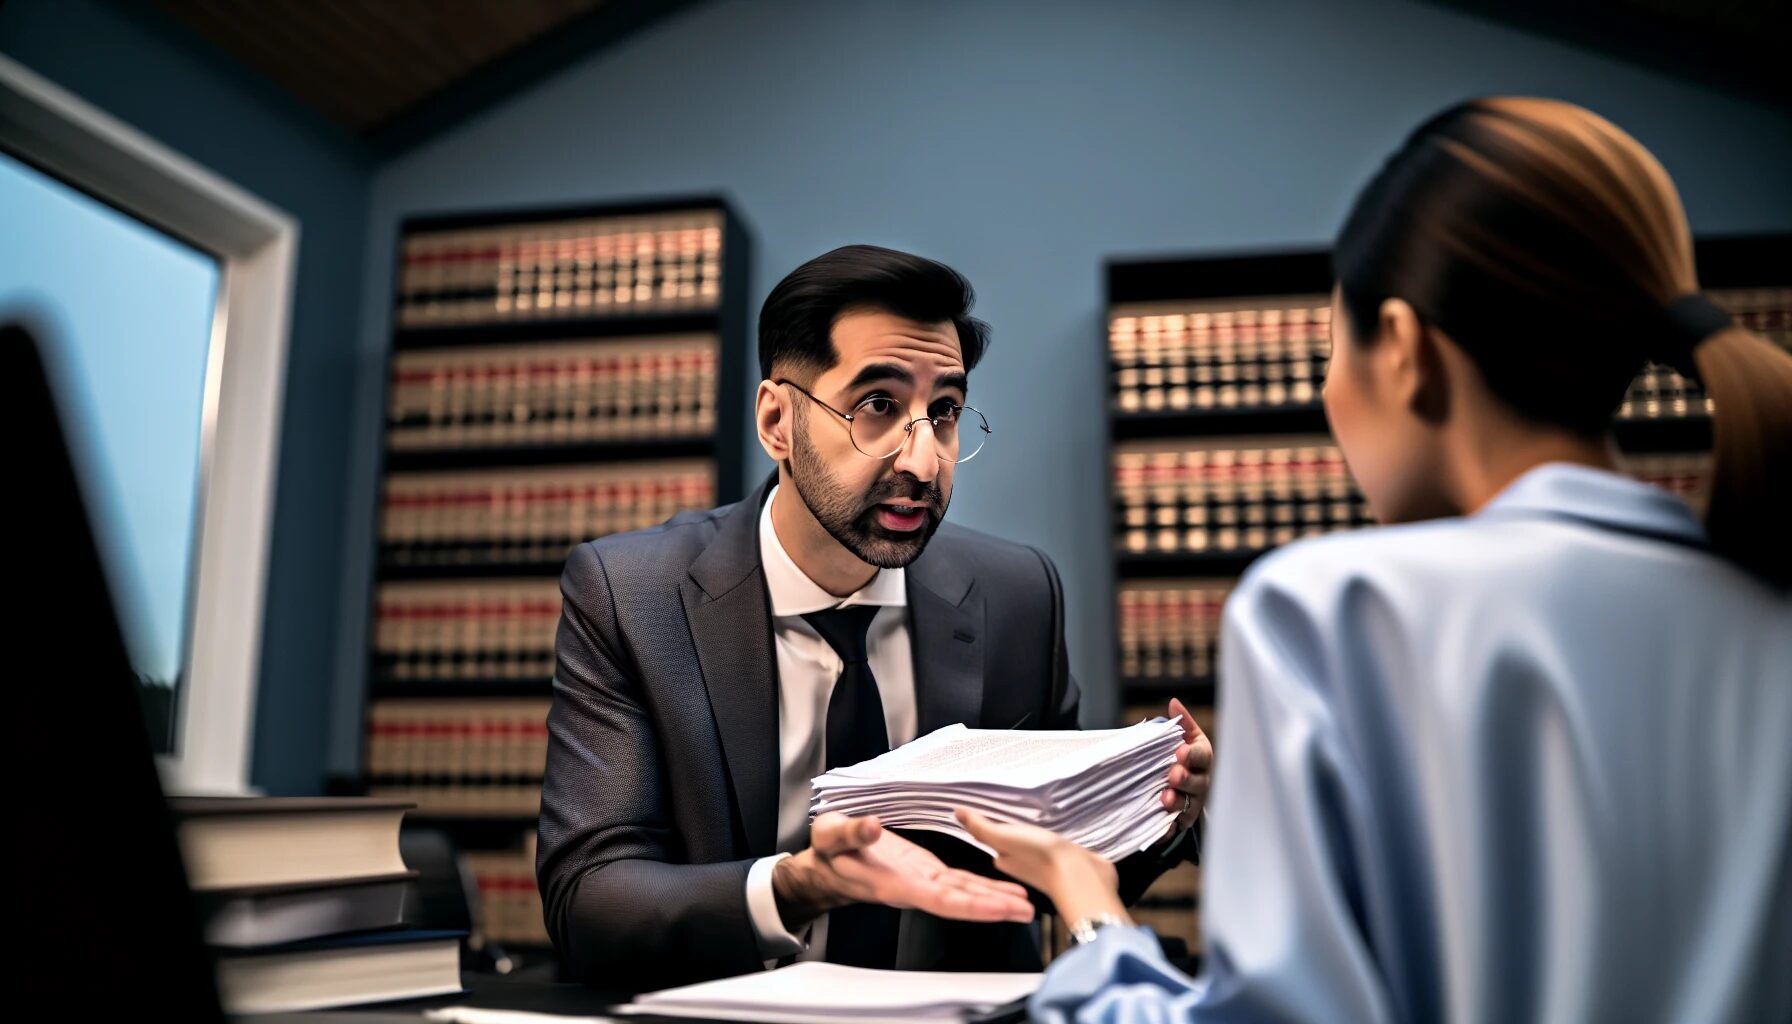 A Catastrophic Injury Lawyer discussing a case with a client